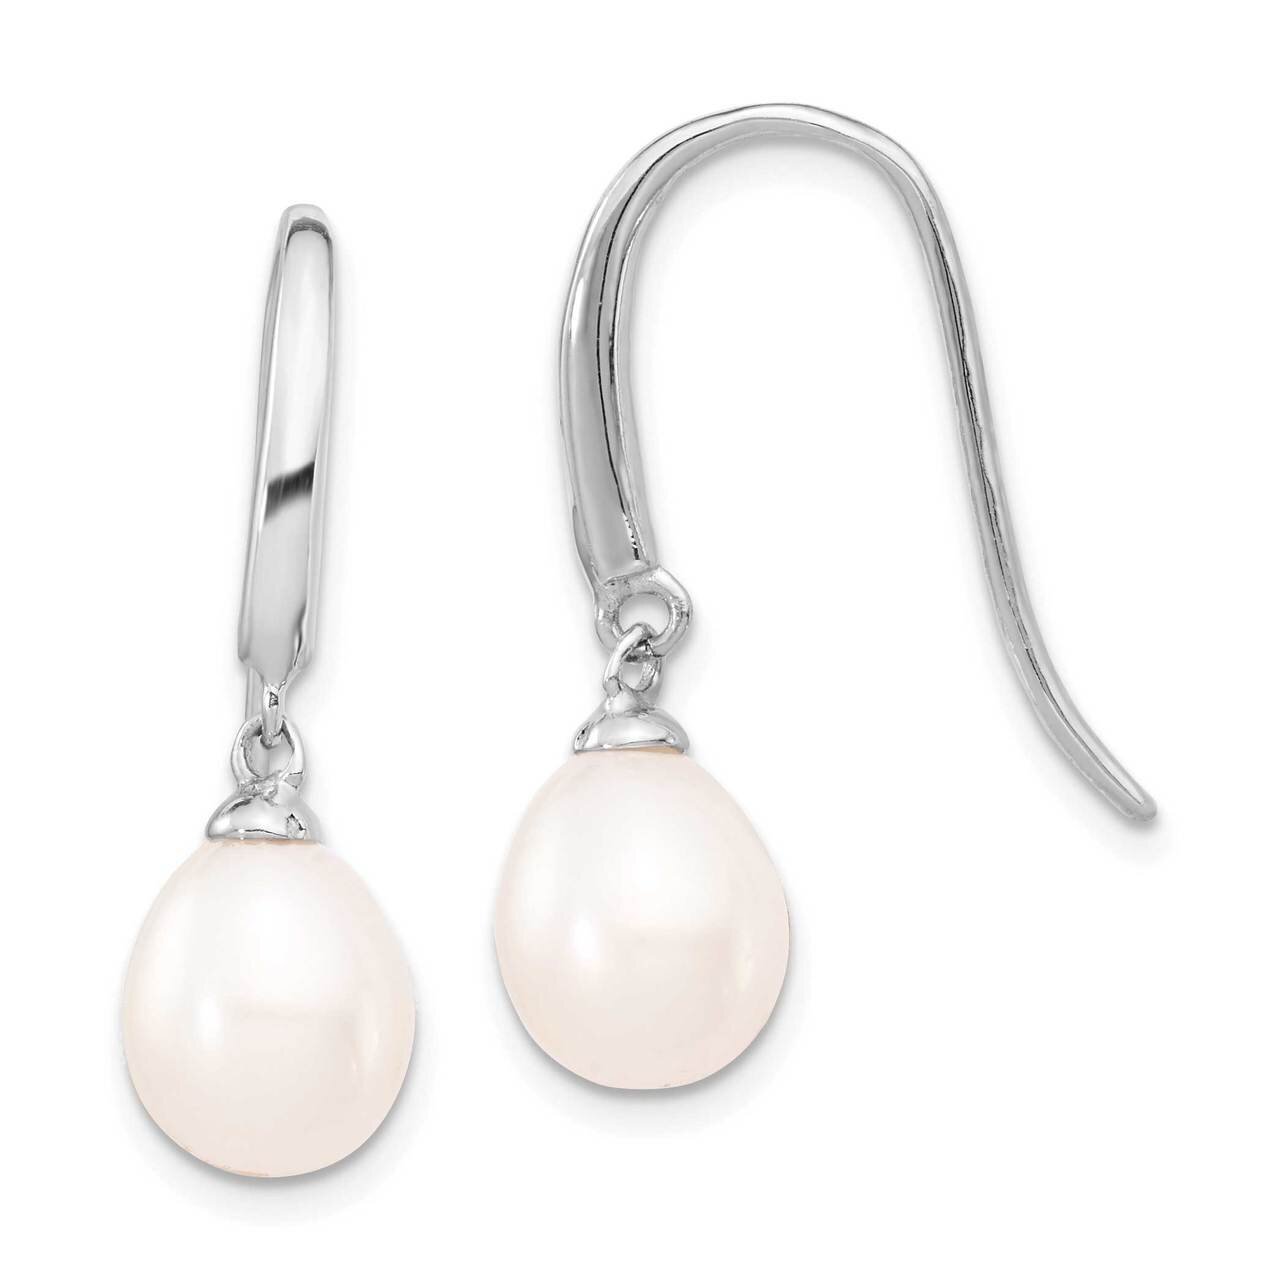 8-9mm White Freshwater Cultured Rice Pearl Dangle Earrings Sterling Silver Rhodium Plated QE4333